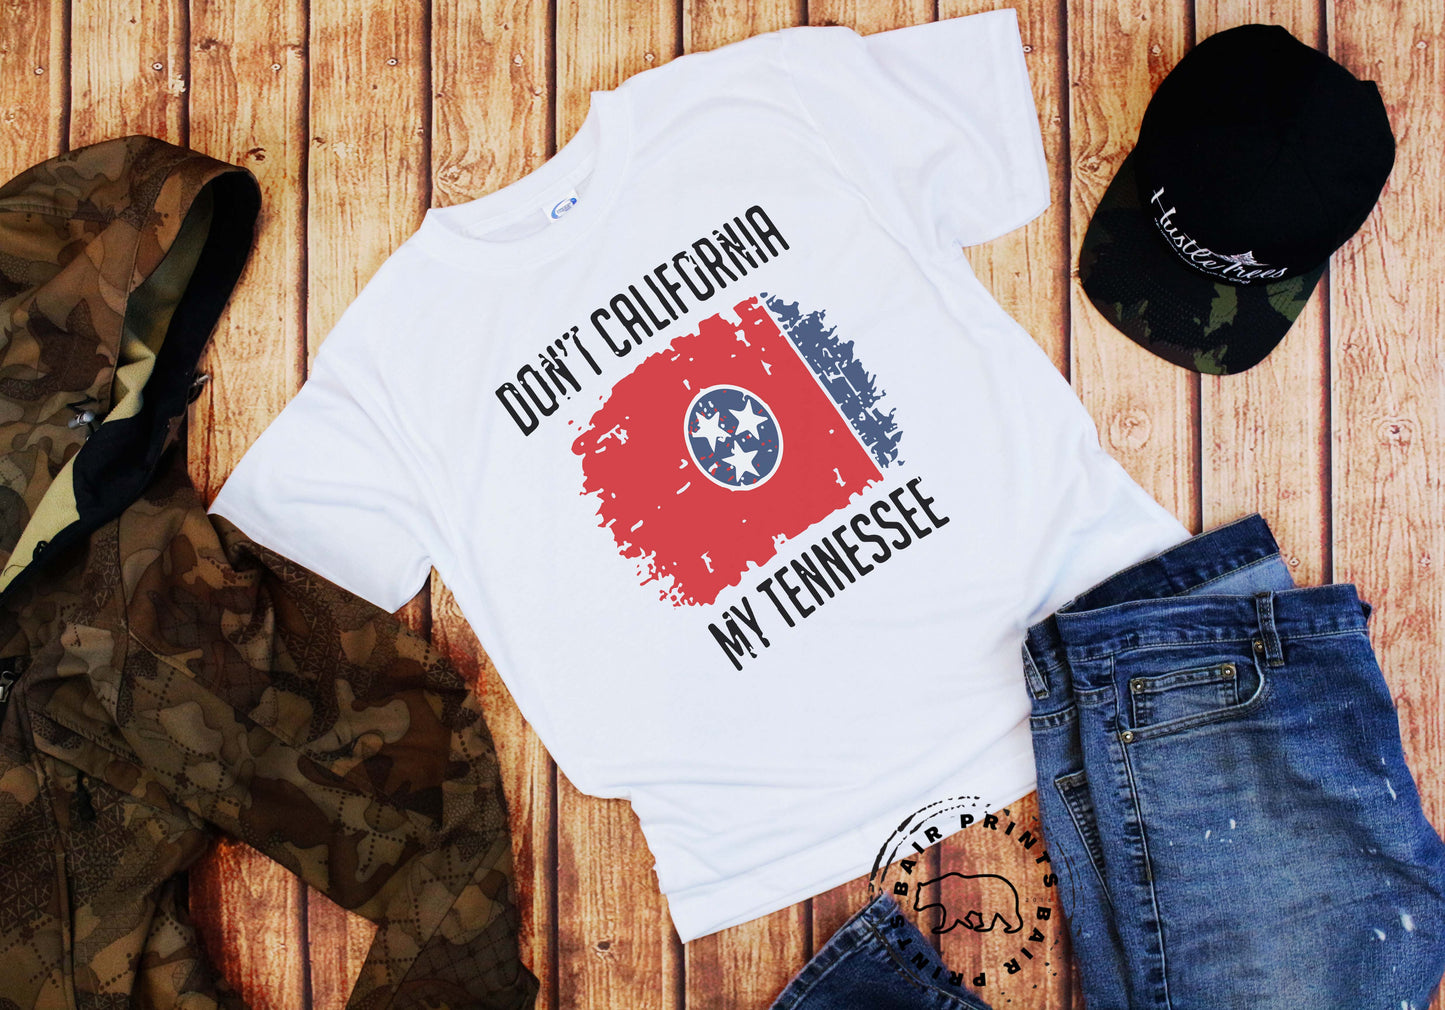 Don't California my Tennessee Tee Shirt. Unisex Small-3XL